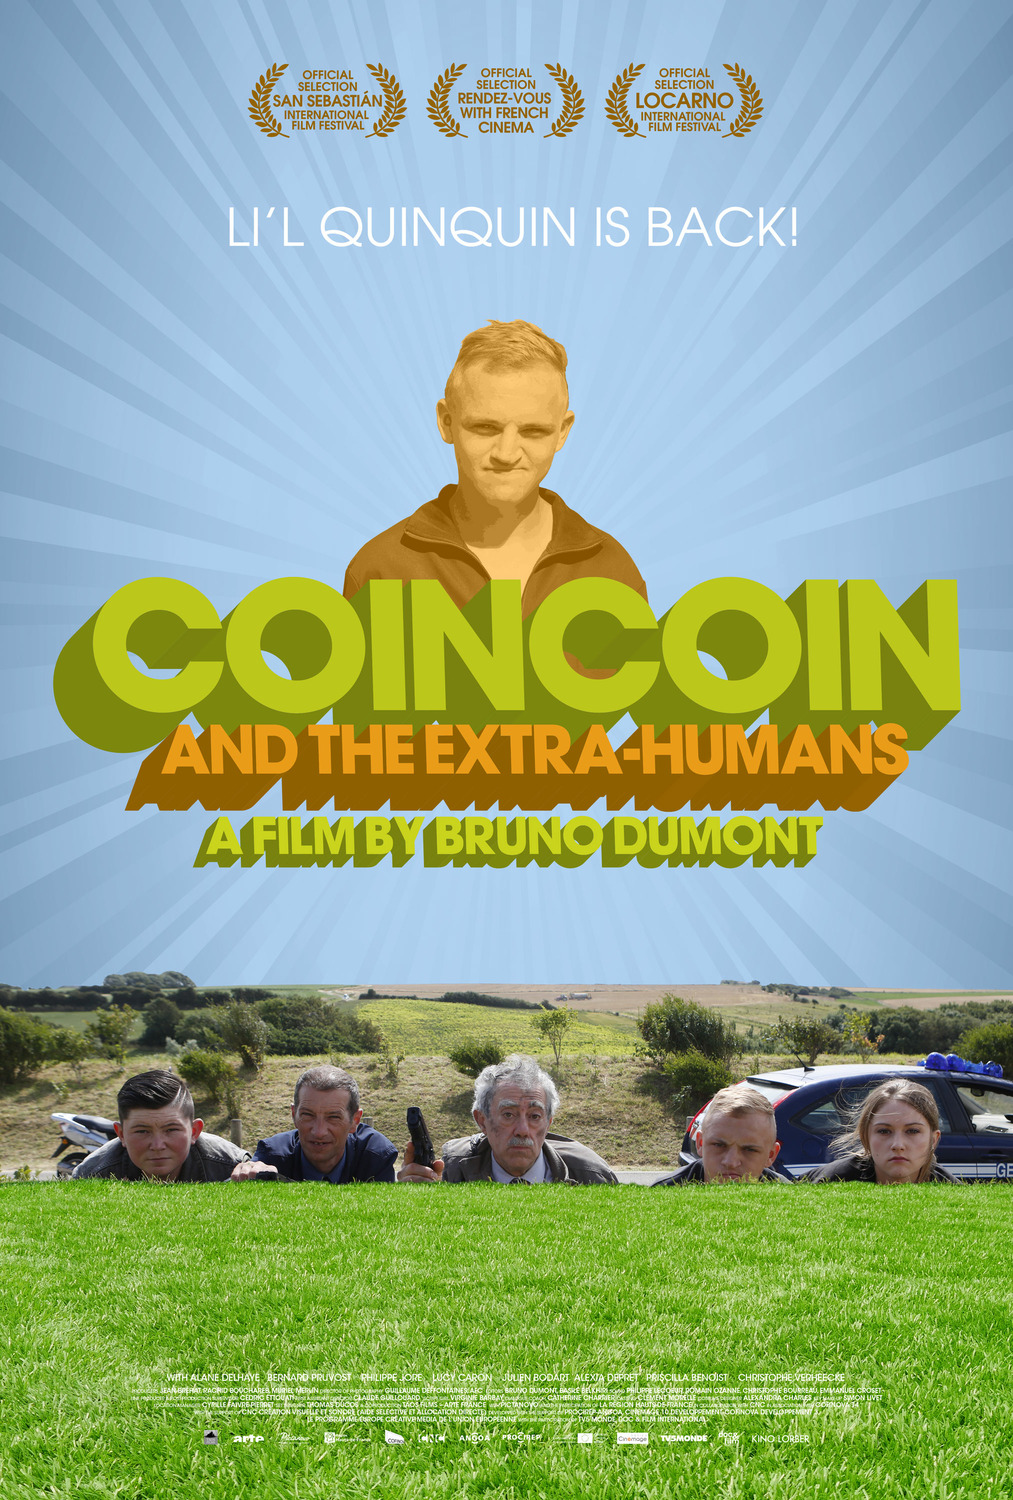 Extra Large TV Poster Image for Coincoin et les z'inhumains (#1 of 2)